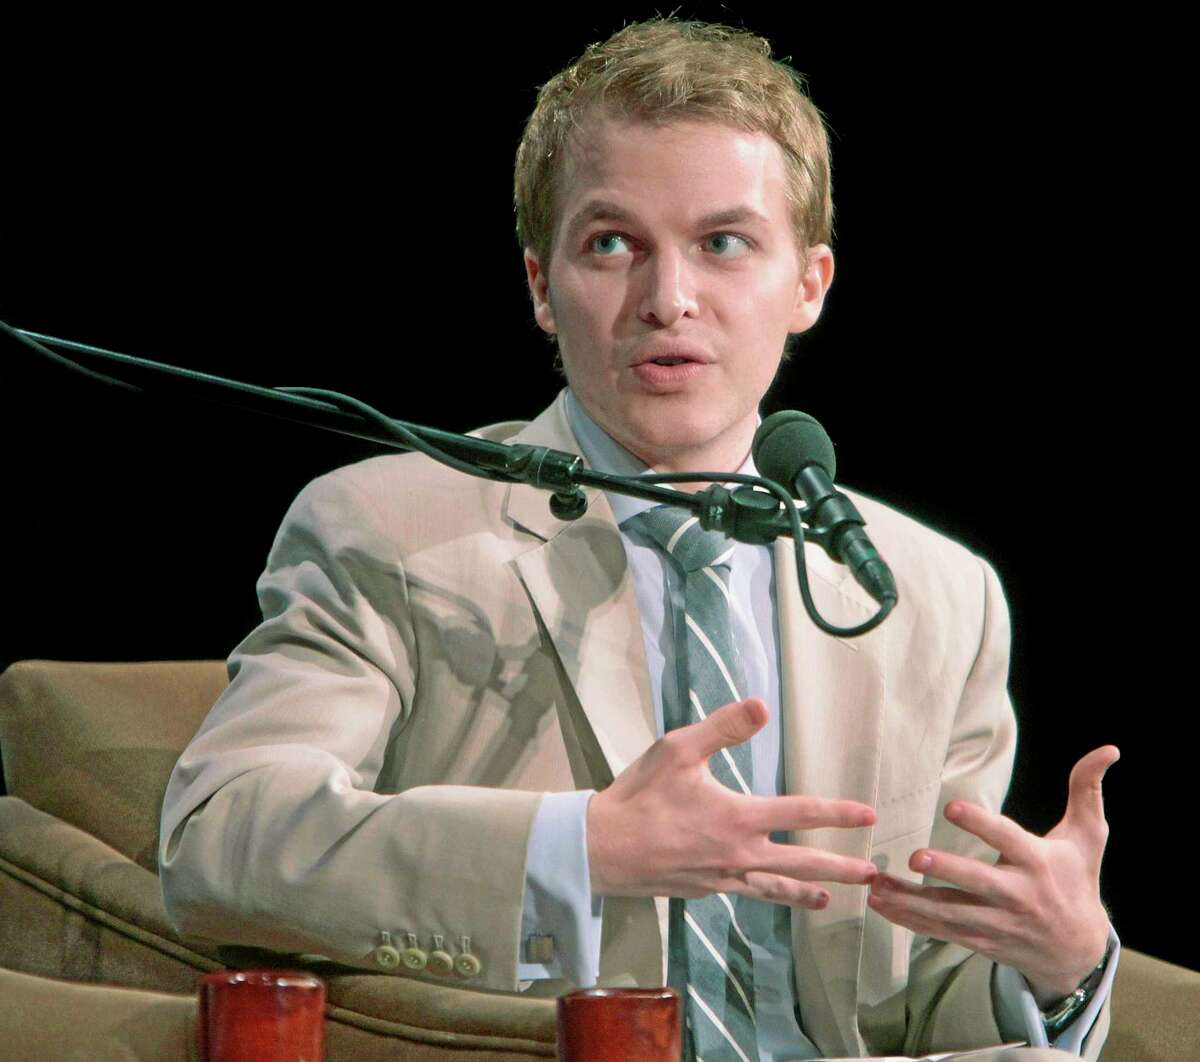 FILE - In this Sept. 22, 2011 file photo released by the United Nations Foundation, Ronan Farrow, Special Adviser to the Secretary of State for Global Youth Issues, speaks during the Social Good Summit in New York. Farrow's mother, actress and activist Mia Farrow says in an interview with Vanity Fair that it’s possible her son with Woody Allen is instead Frank Sinatra’s. Farrow told the magazine that she and Sinatra “never really split up” and when asked if Ronan Farrow might actually be Sinatra’s son, she answered, “Possibly.” (AP Photo/United Nations Foundation, Gary He)